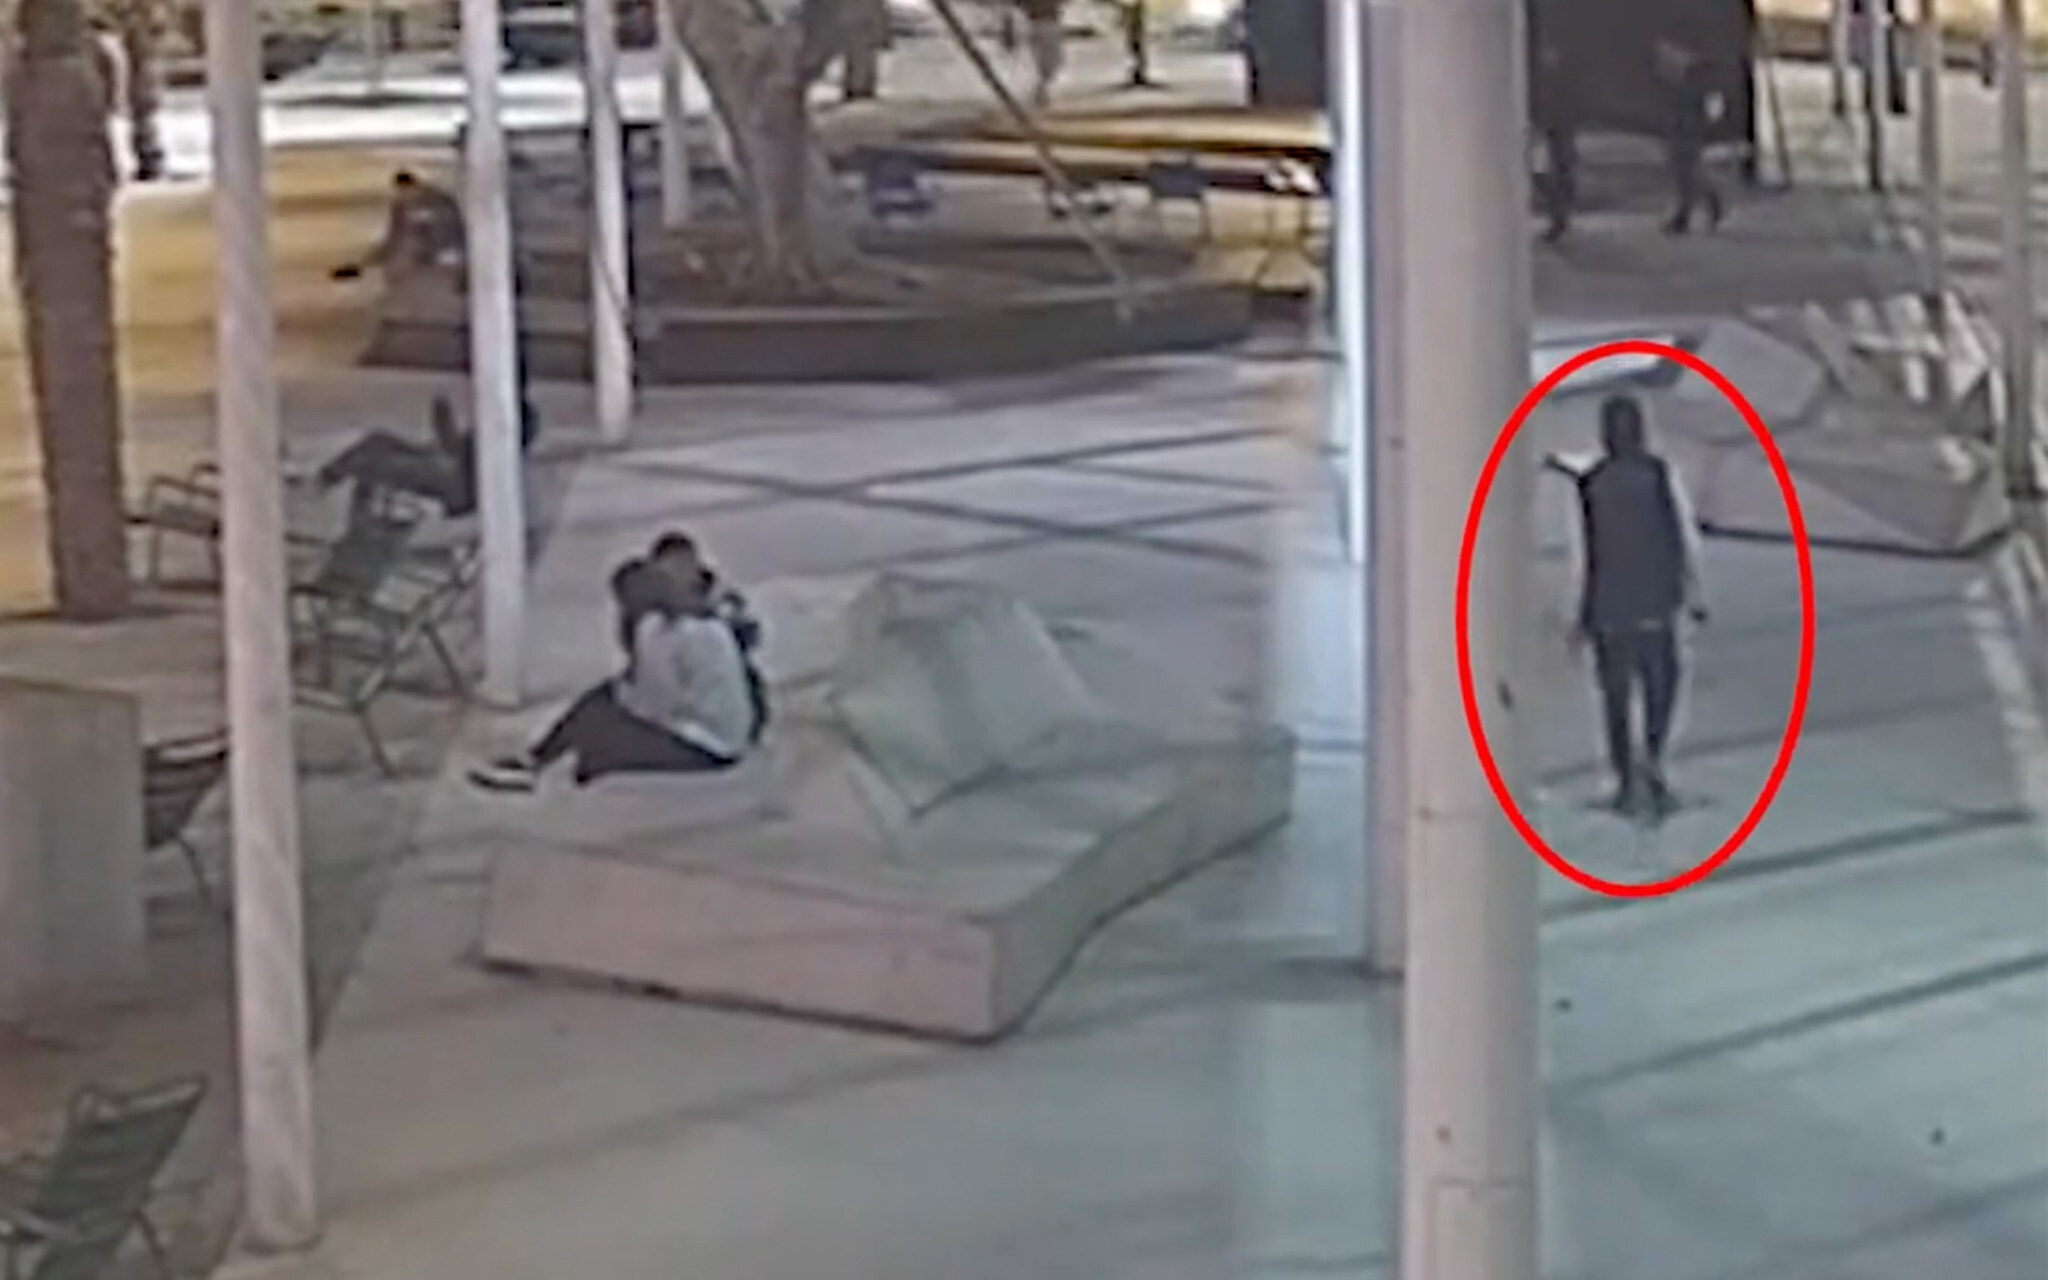 Frist Time Sex Gung Rape Video - Three men indicted over gang rape of 13-year-old girl in Netanya | The Times  of Israel